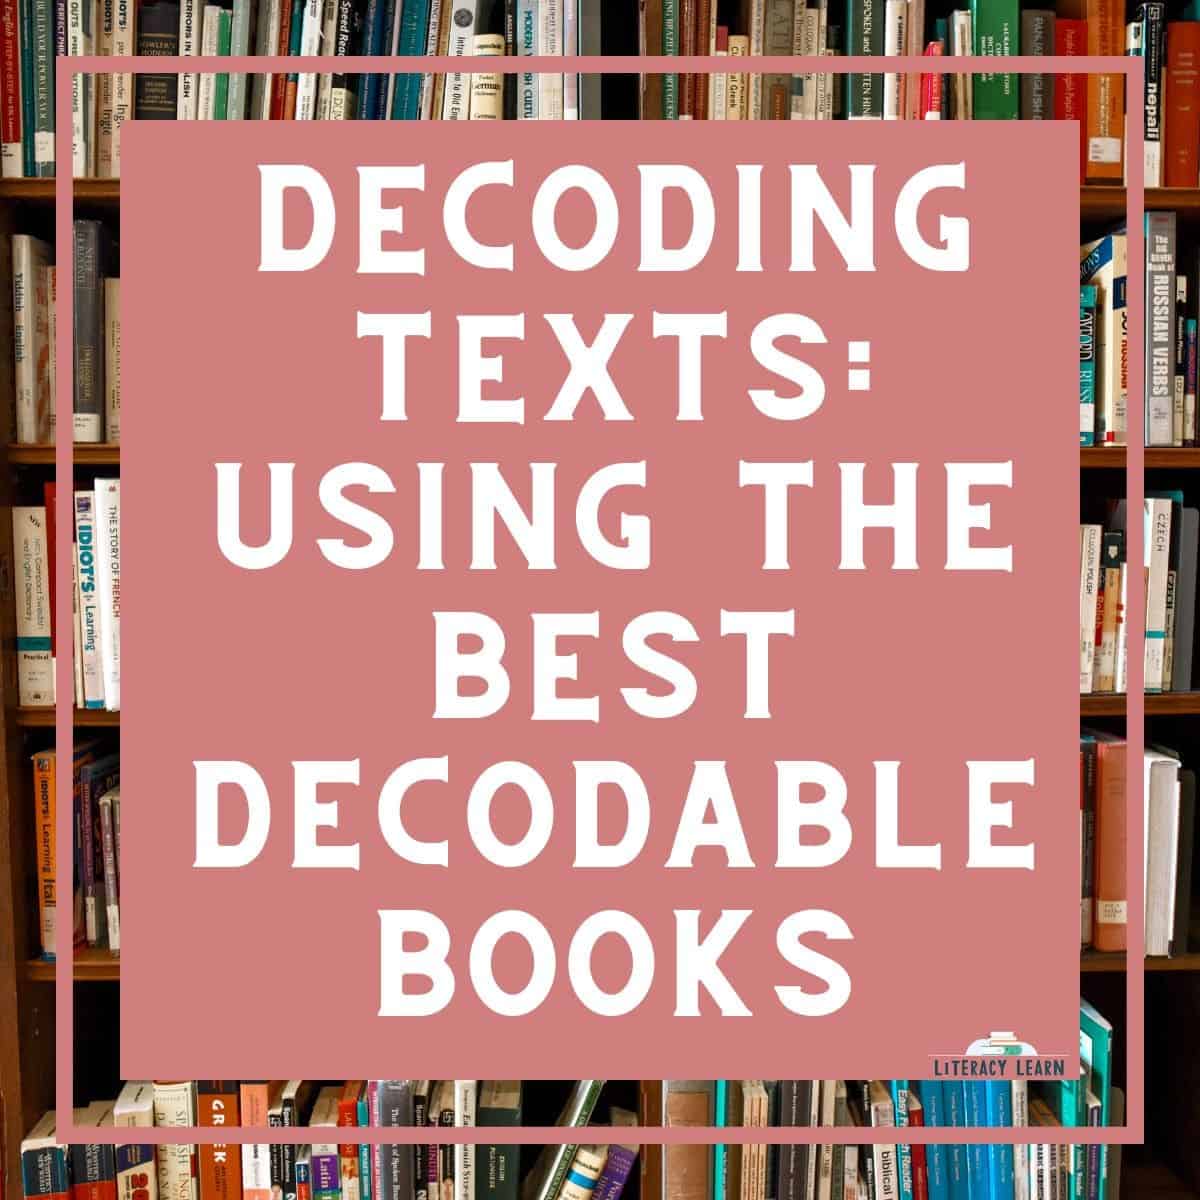 Photograph of shelved library books with words "Decoding Texts: Using the Best Decodable Books."